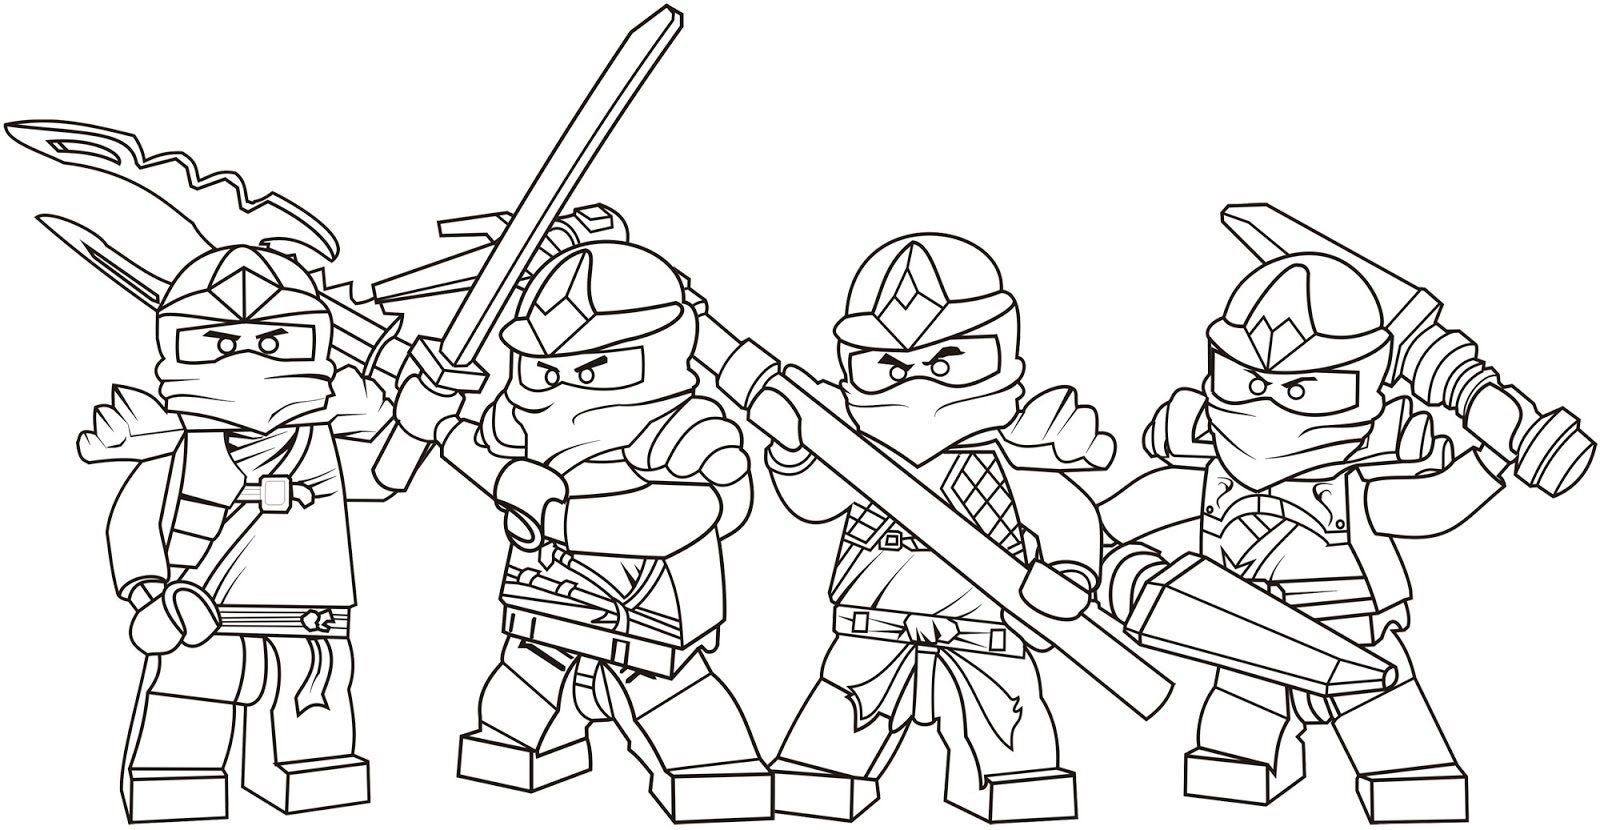 Ninja coloring pages here is our collection of best ninja coloring pages toâ ninjago coloring pages lego coloring pages lego coloring